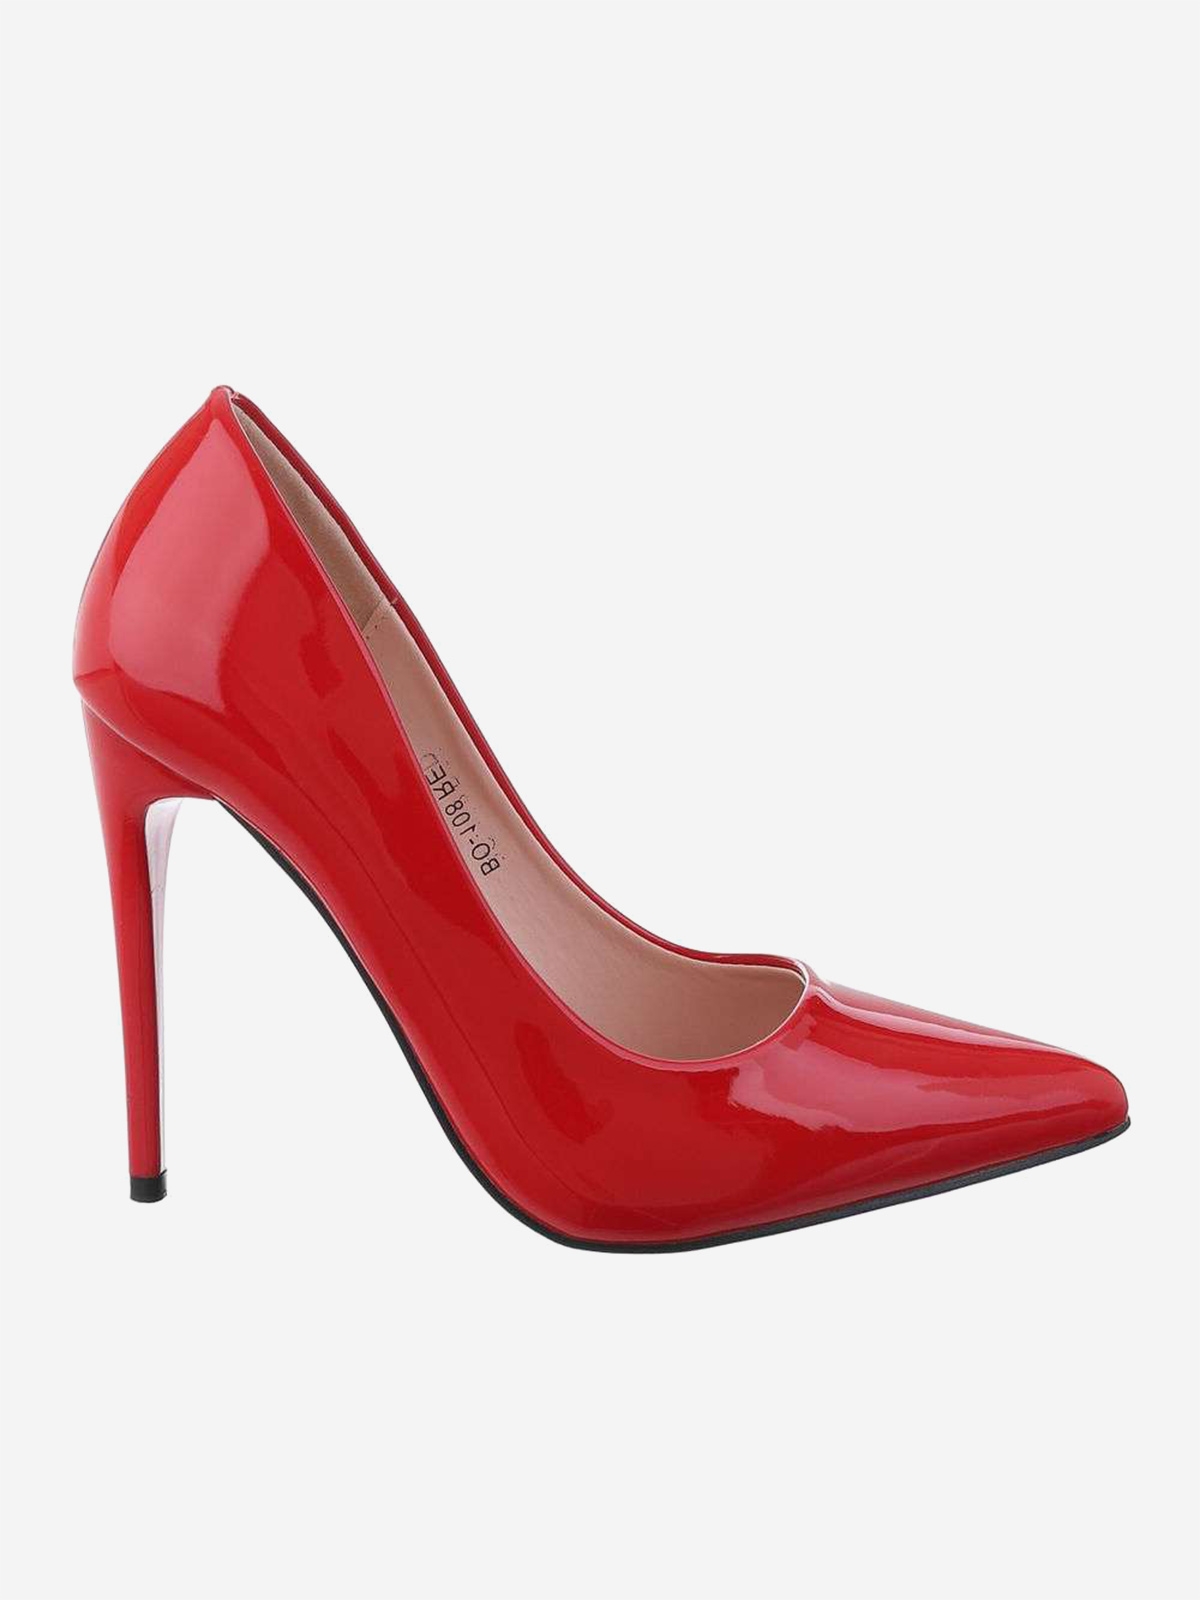 Women's high-heeled shoes in red